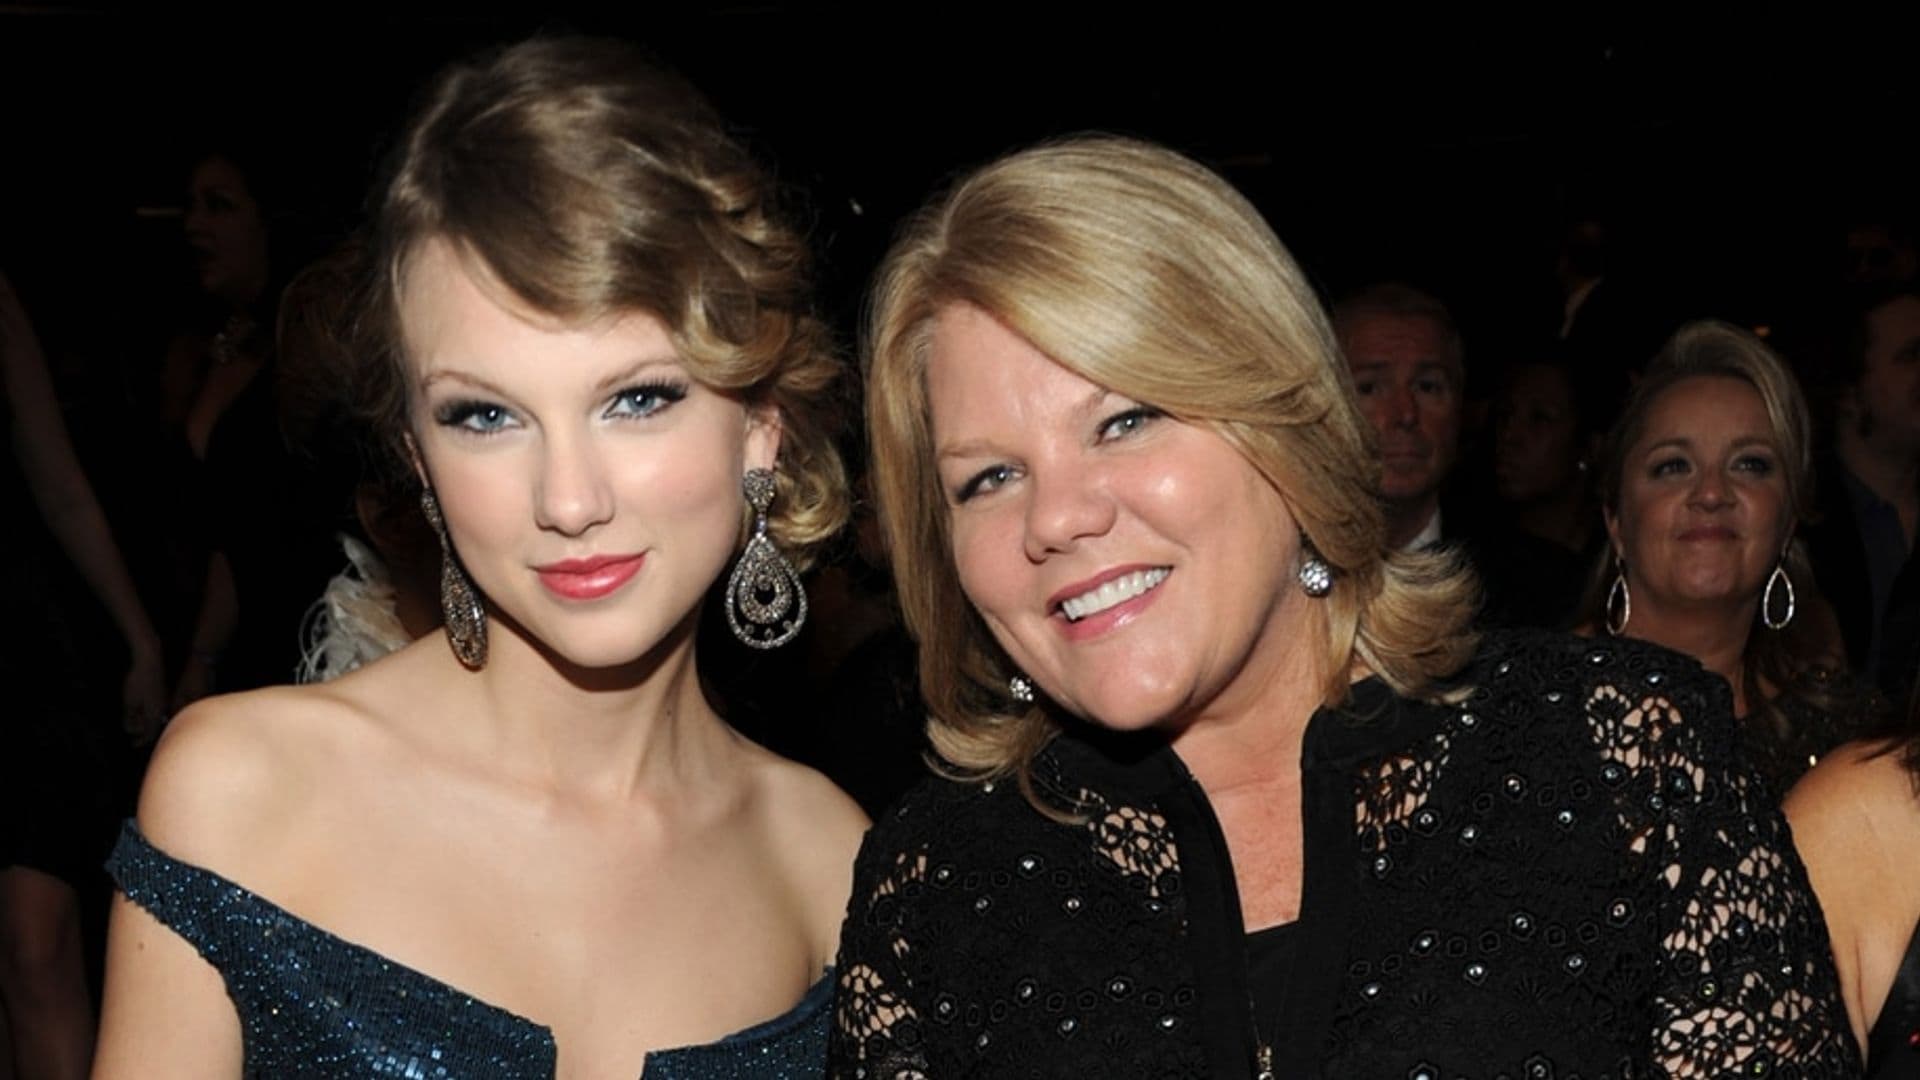 Taylor Swift addresses her mom's battle with cancer in new heartbreaking song